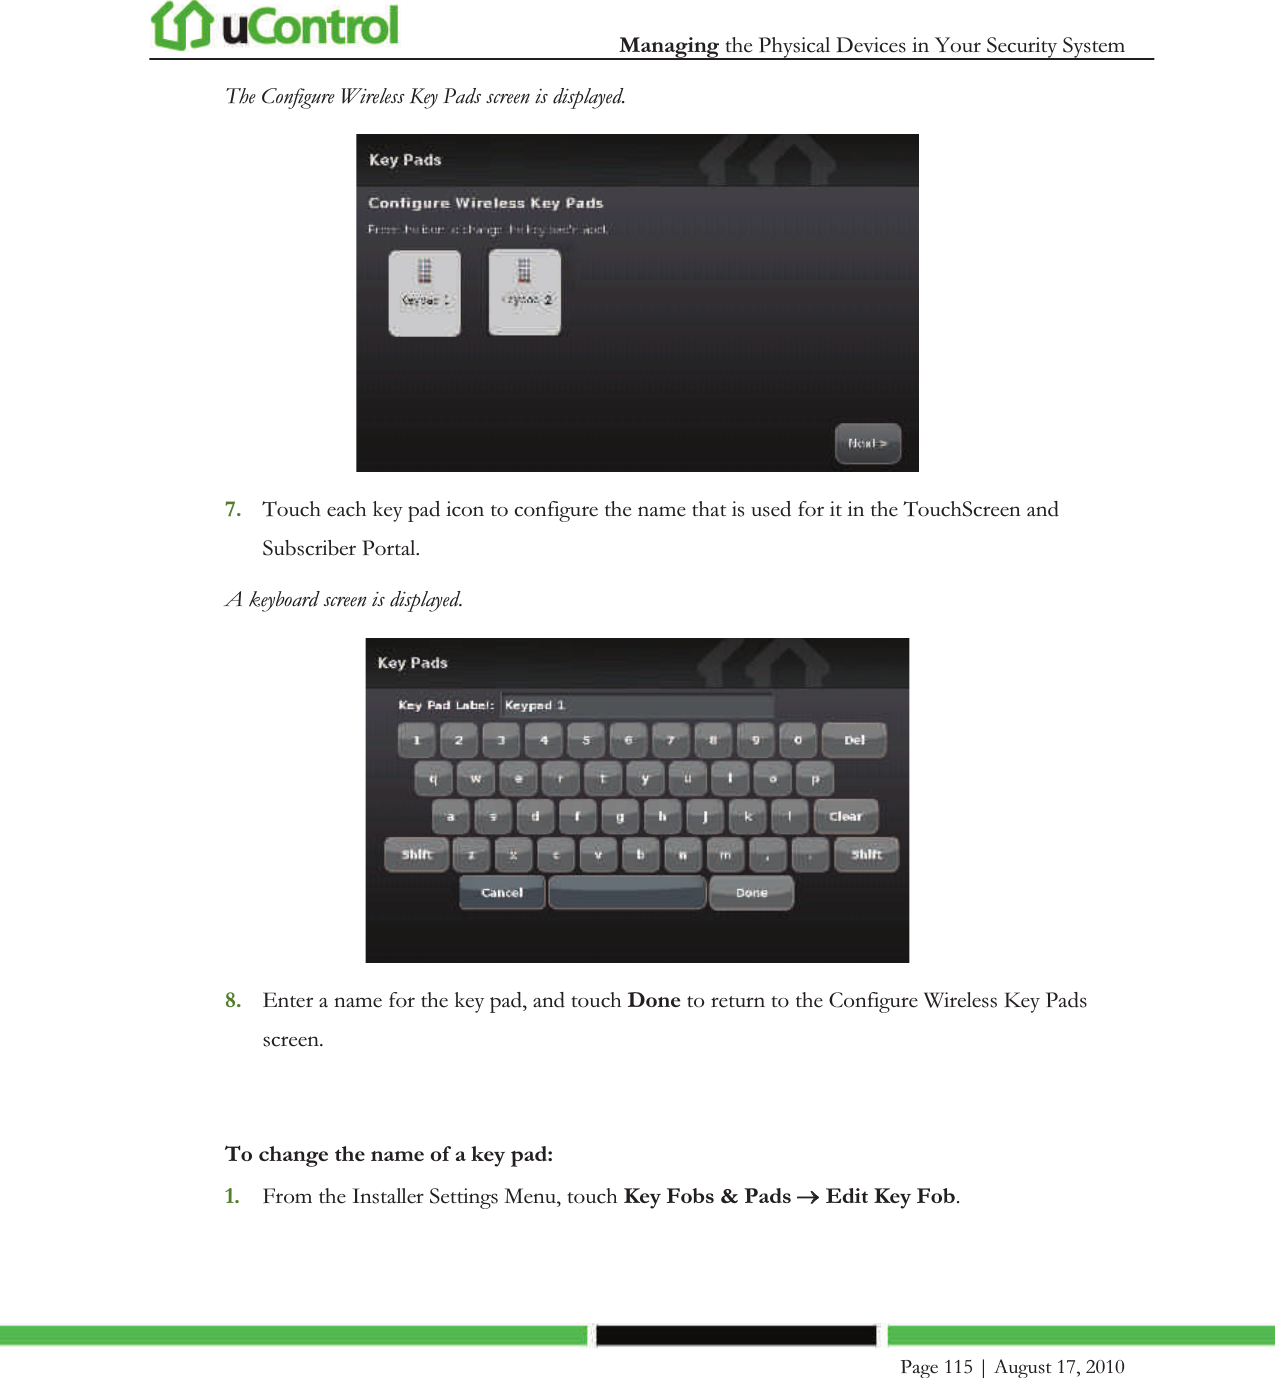  Managing the Physical Devices in Your Security System    Page 115 | August 17, 2010   The Configure Wireless Key Pads screen is displayed.  7. Touch each key pad icon to configure the name that is used for it in the TouchScreen and Subscriber Portal. A keyboard screen is displayed.   8. Enter a name for the key pad, and touch Done to return to the Configure Wireless Key Pads screen.  To change the name of a key pad: 1. From the Installer Settings Menu, touch Key Fobs &amp; Pads o Edit Key Fob. 